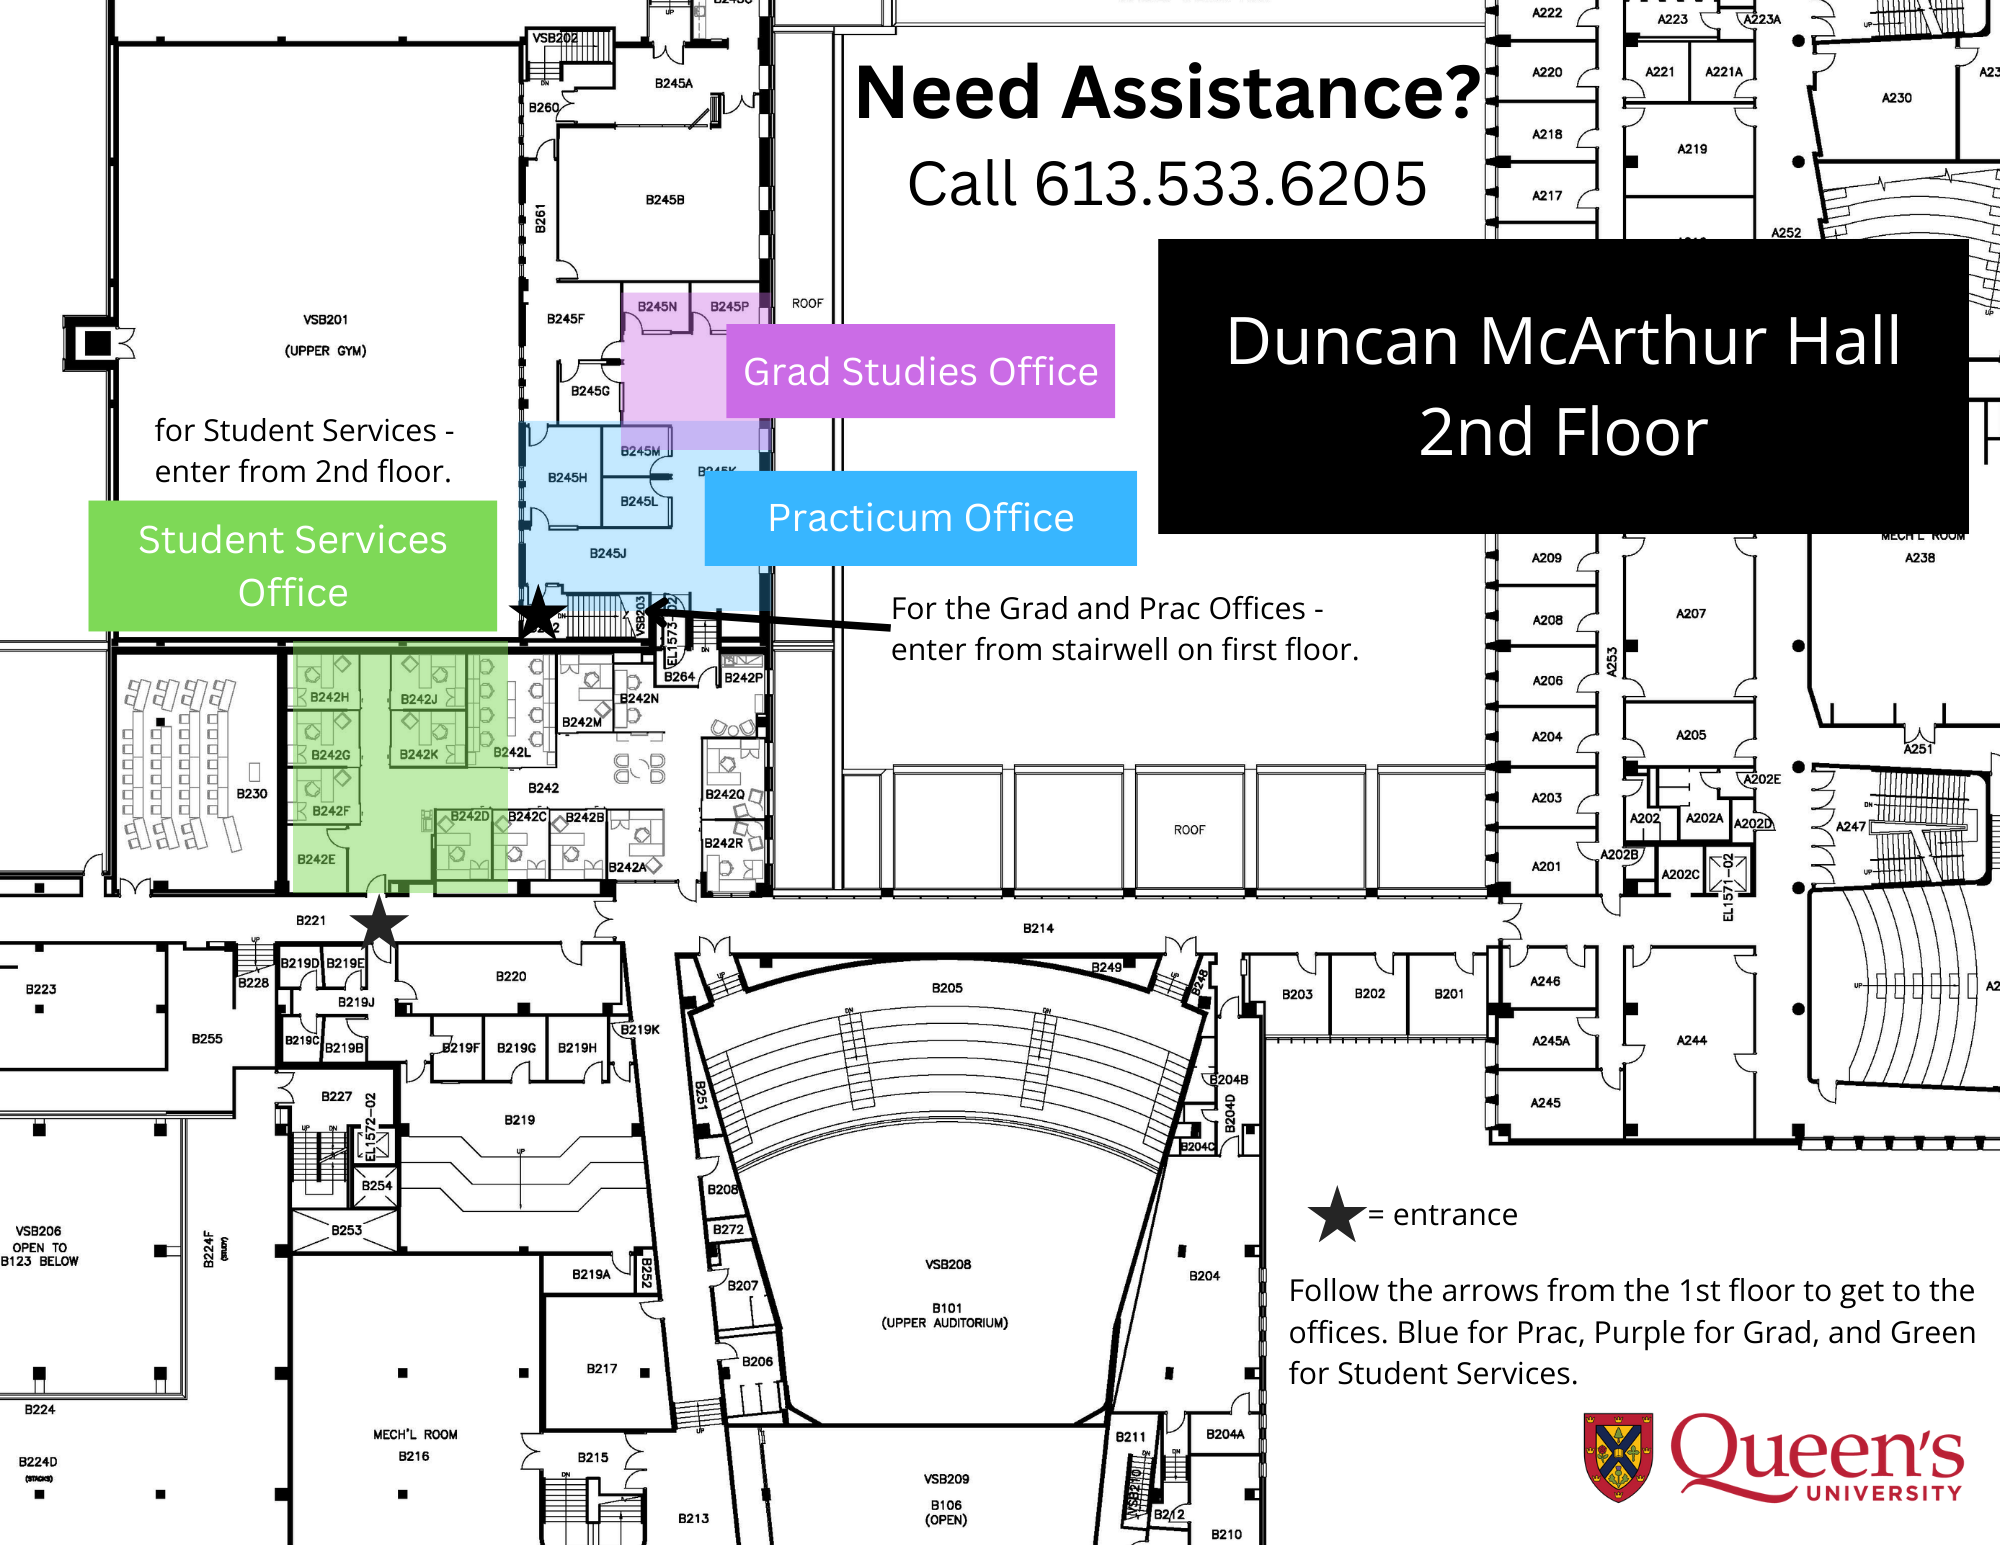 Map of where offices are located at Duncan McArthur Hall 